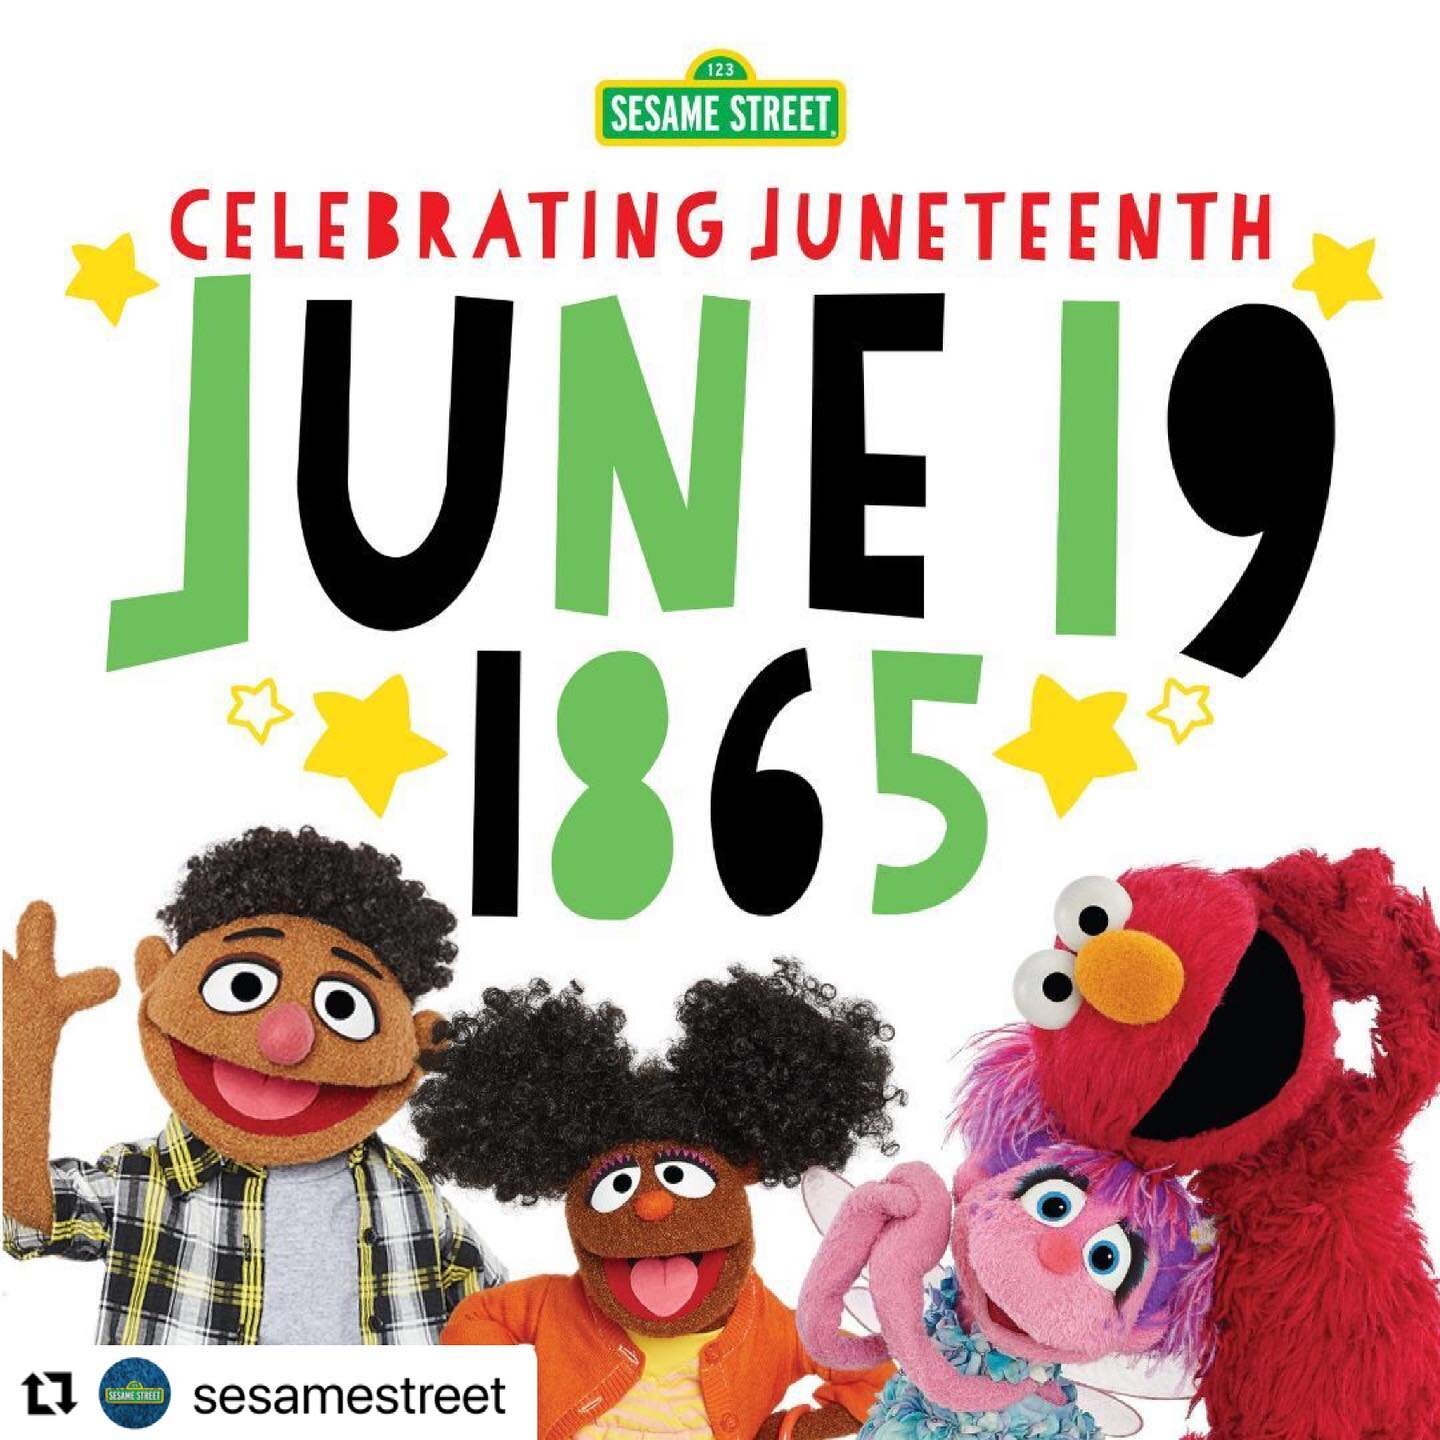 #Repost @sesamestreet with @make_repost
・・・
On this day in 1865, many enslaved African Americans learned of their freedom. We commemorate today by celebrating #Juneteenth with our family and friends. Are you celebrating Juneteenth too?